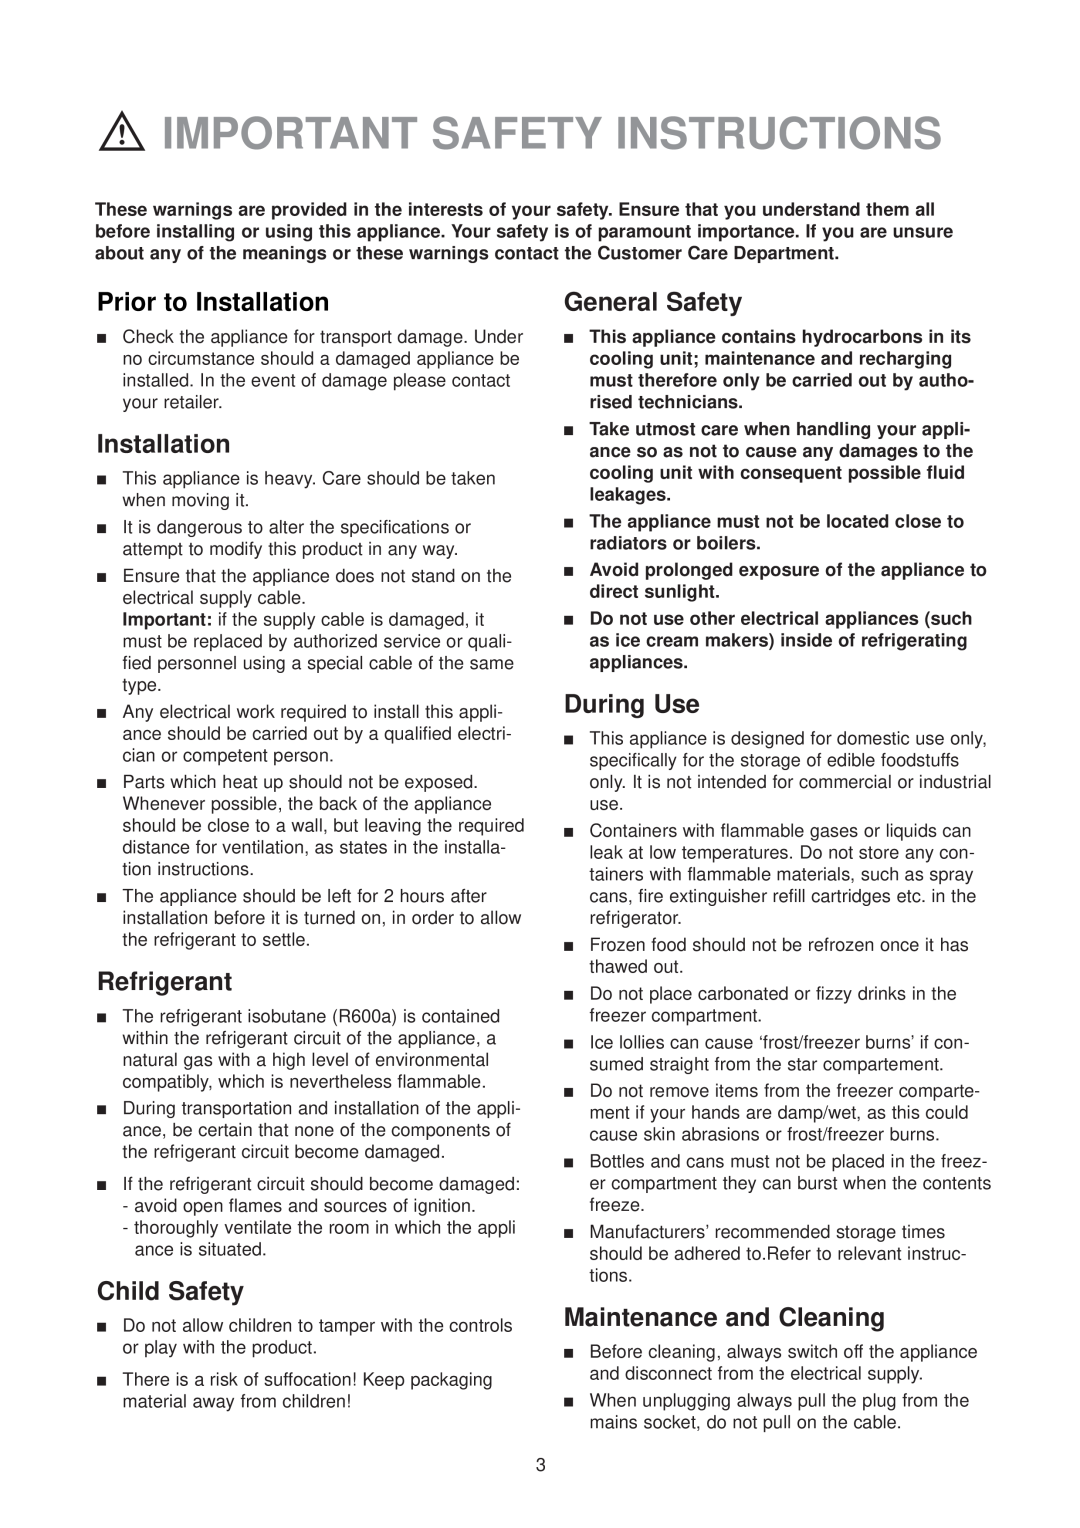 Zanussi ZUD 9124 manual Important Safety Instructions, Prior to Installation, Refrigerant, Child Safety, General Safety 